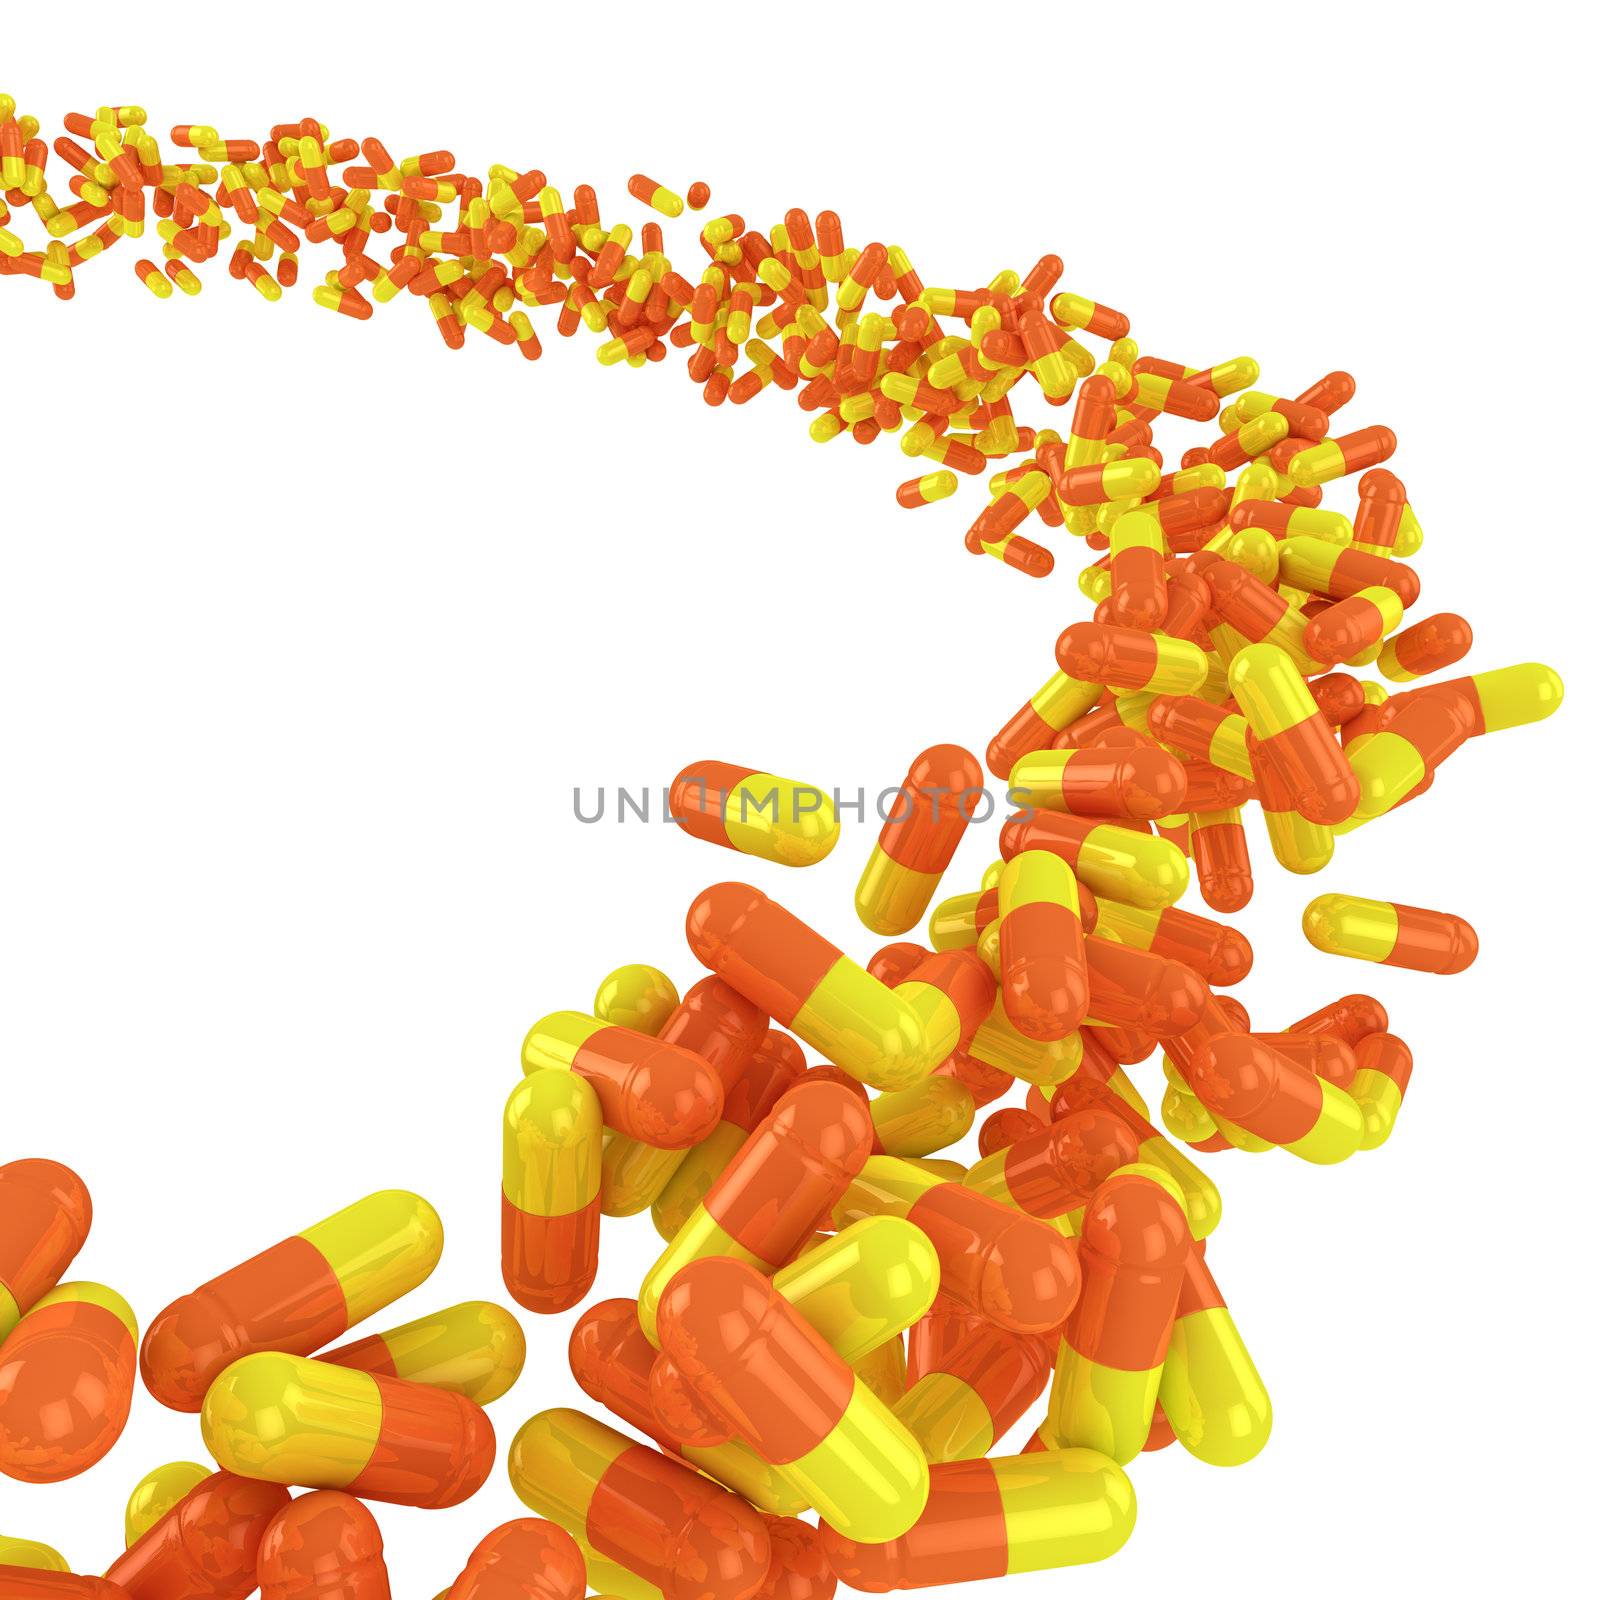 Flow of many medical capsules on the white background